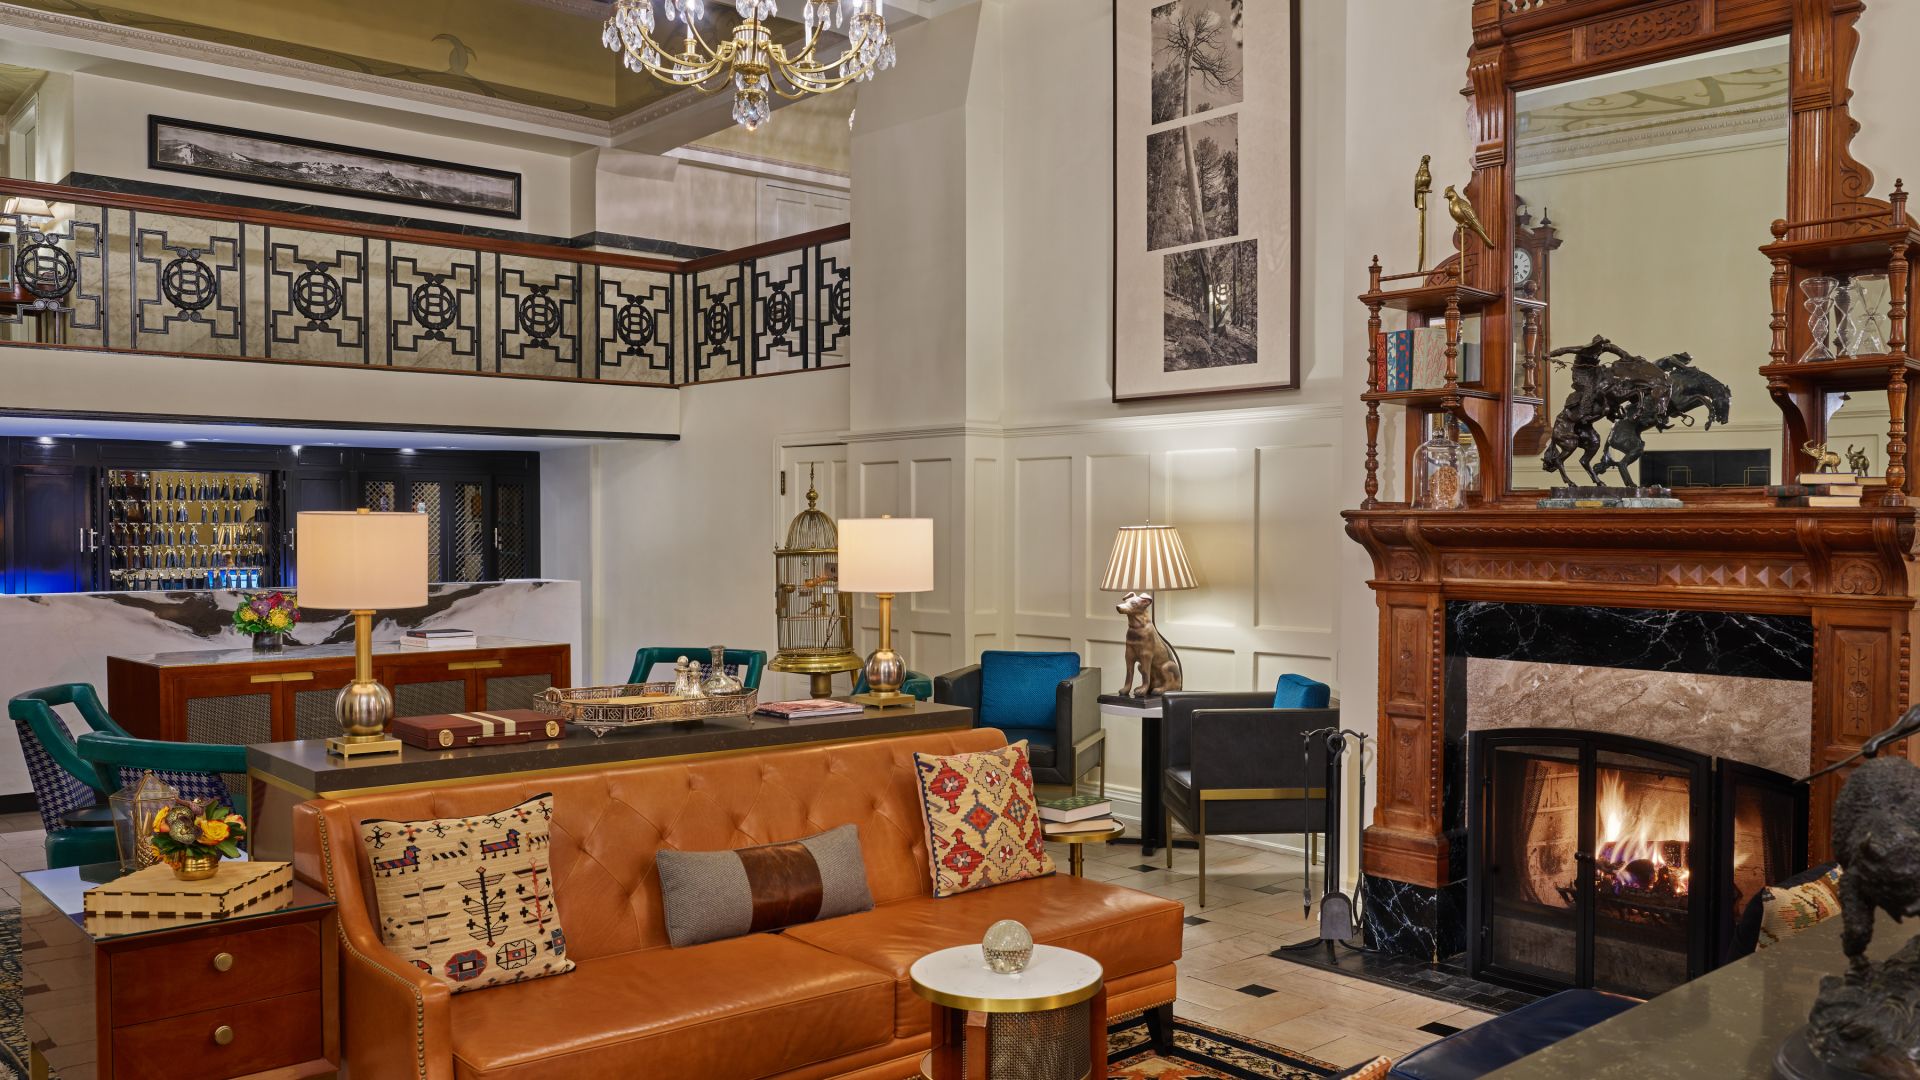 The Classic Oxford Lobby - Filled with character and antiques